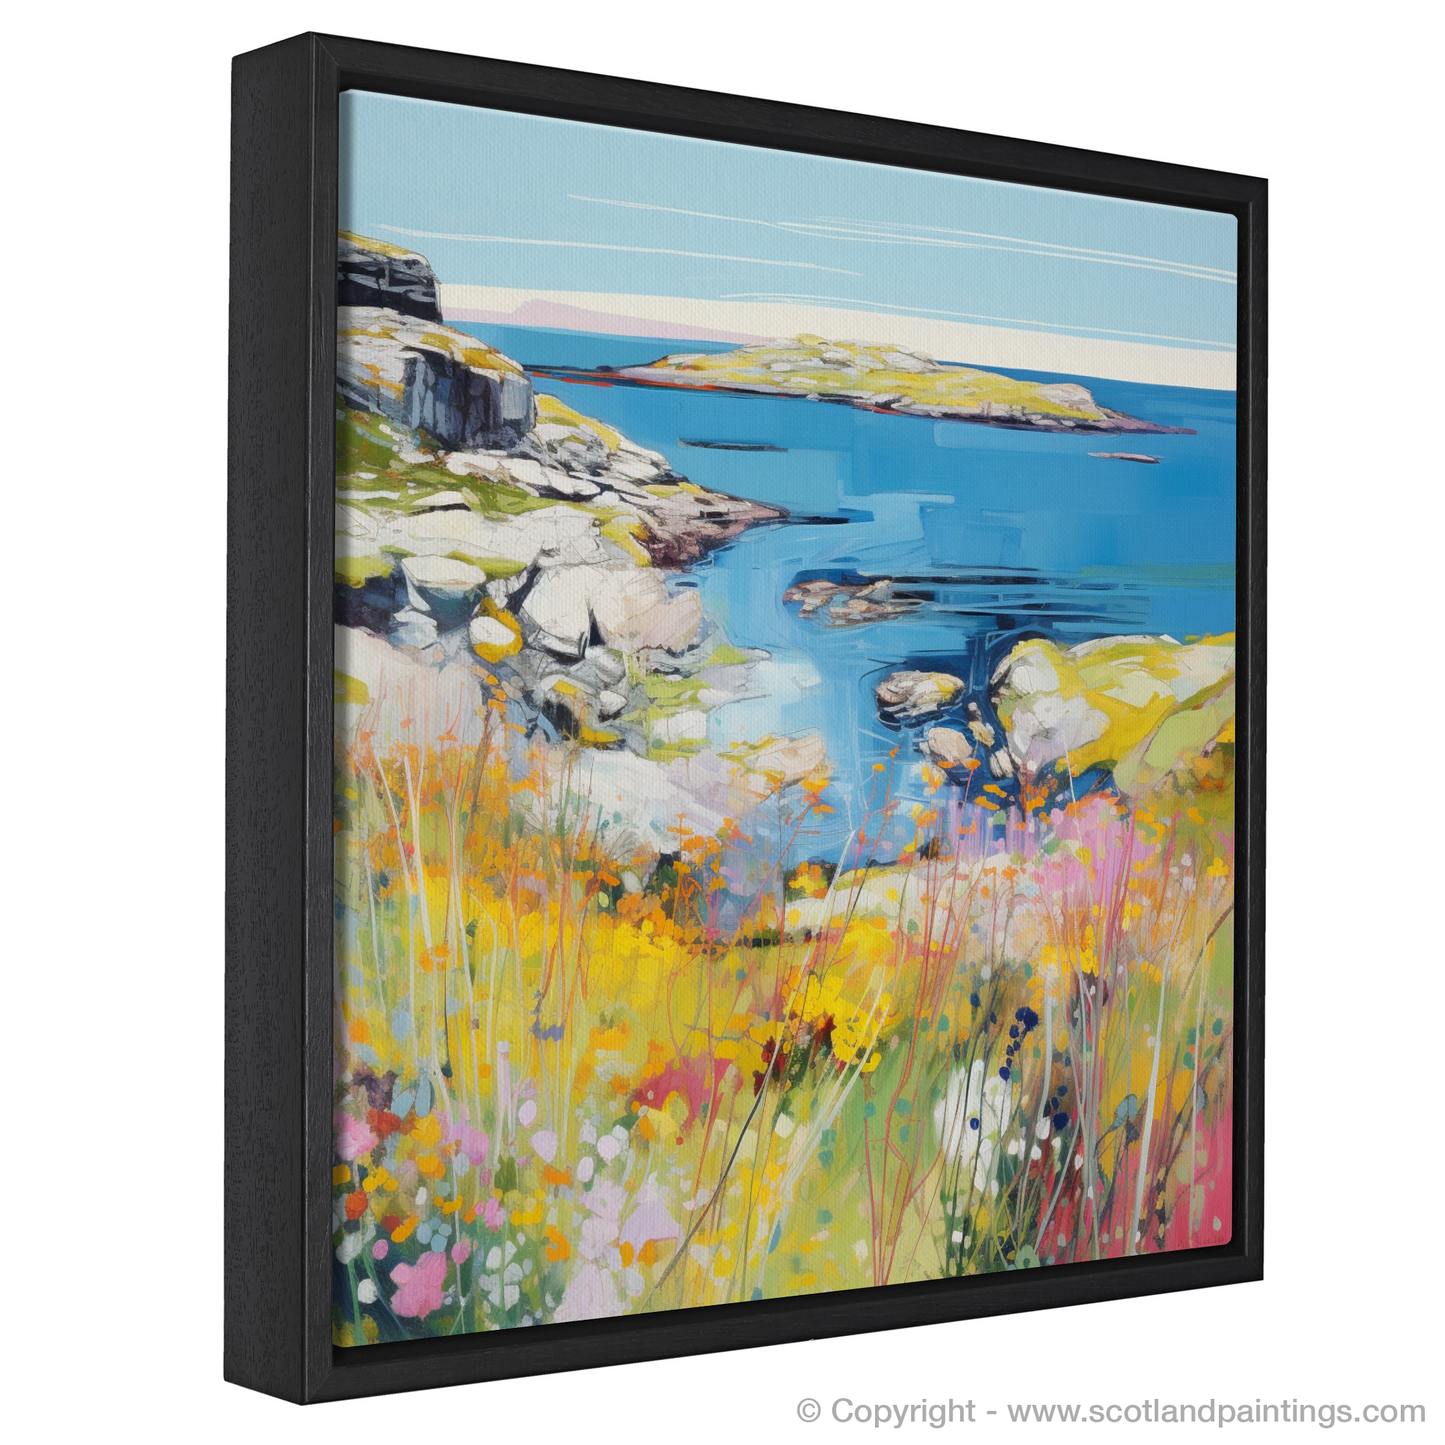 Painting and Art Print of Isle of Scalpay, Outer Hebrides in summer entitled "Summer Embrace on Scalpay Isle".